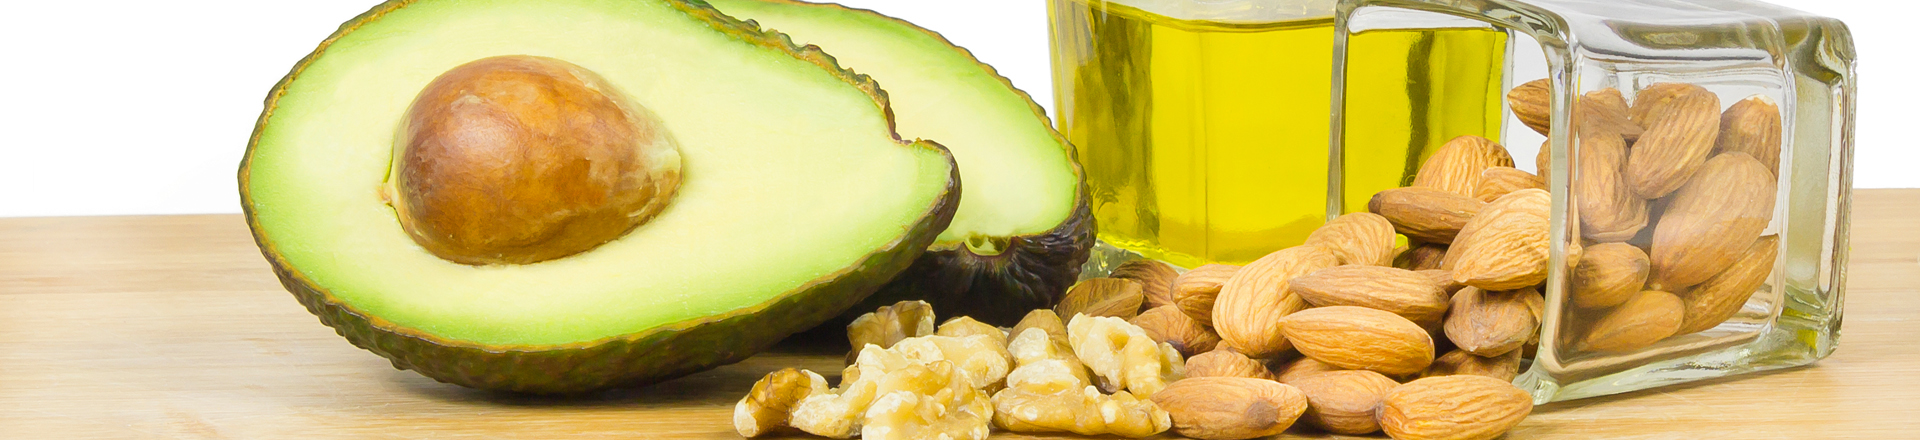 healthy monounsaturated fats olive oil, avocado, and walnuts, and almonds - on a cutting board